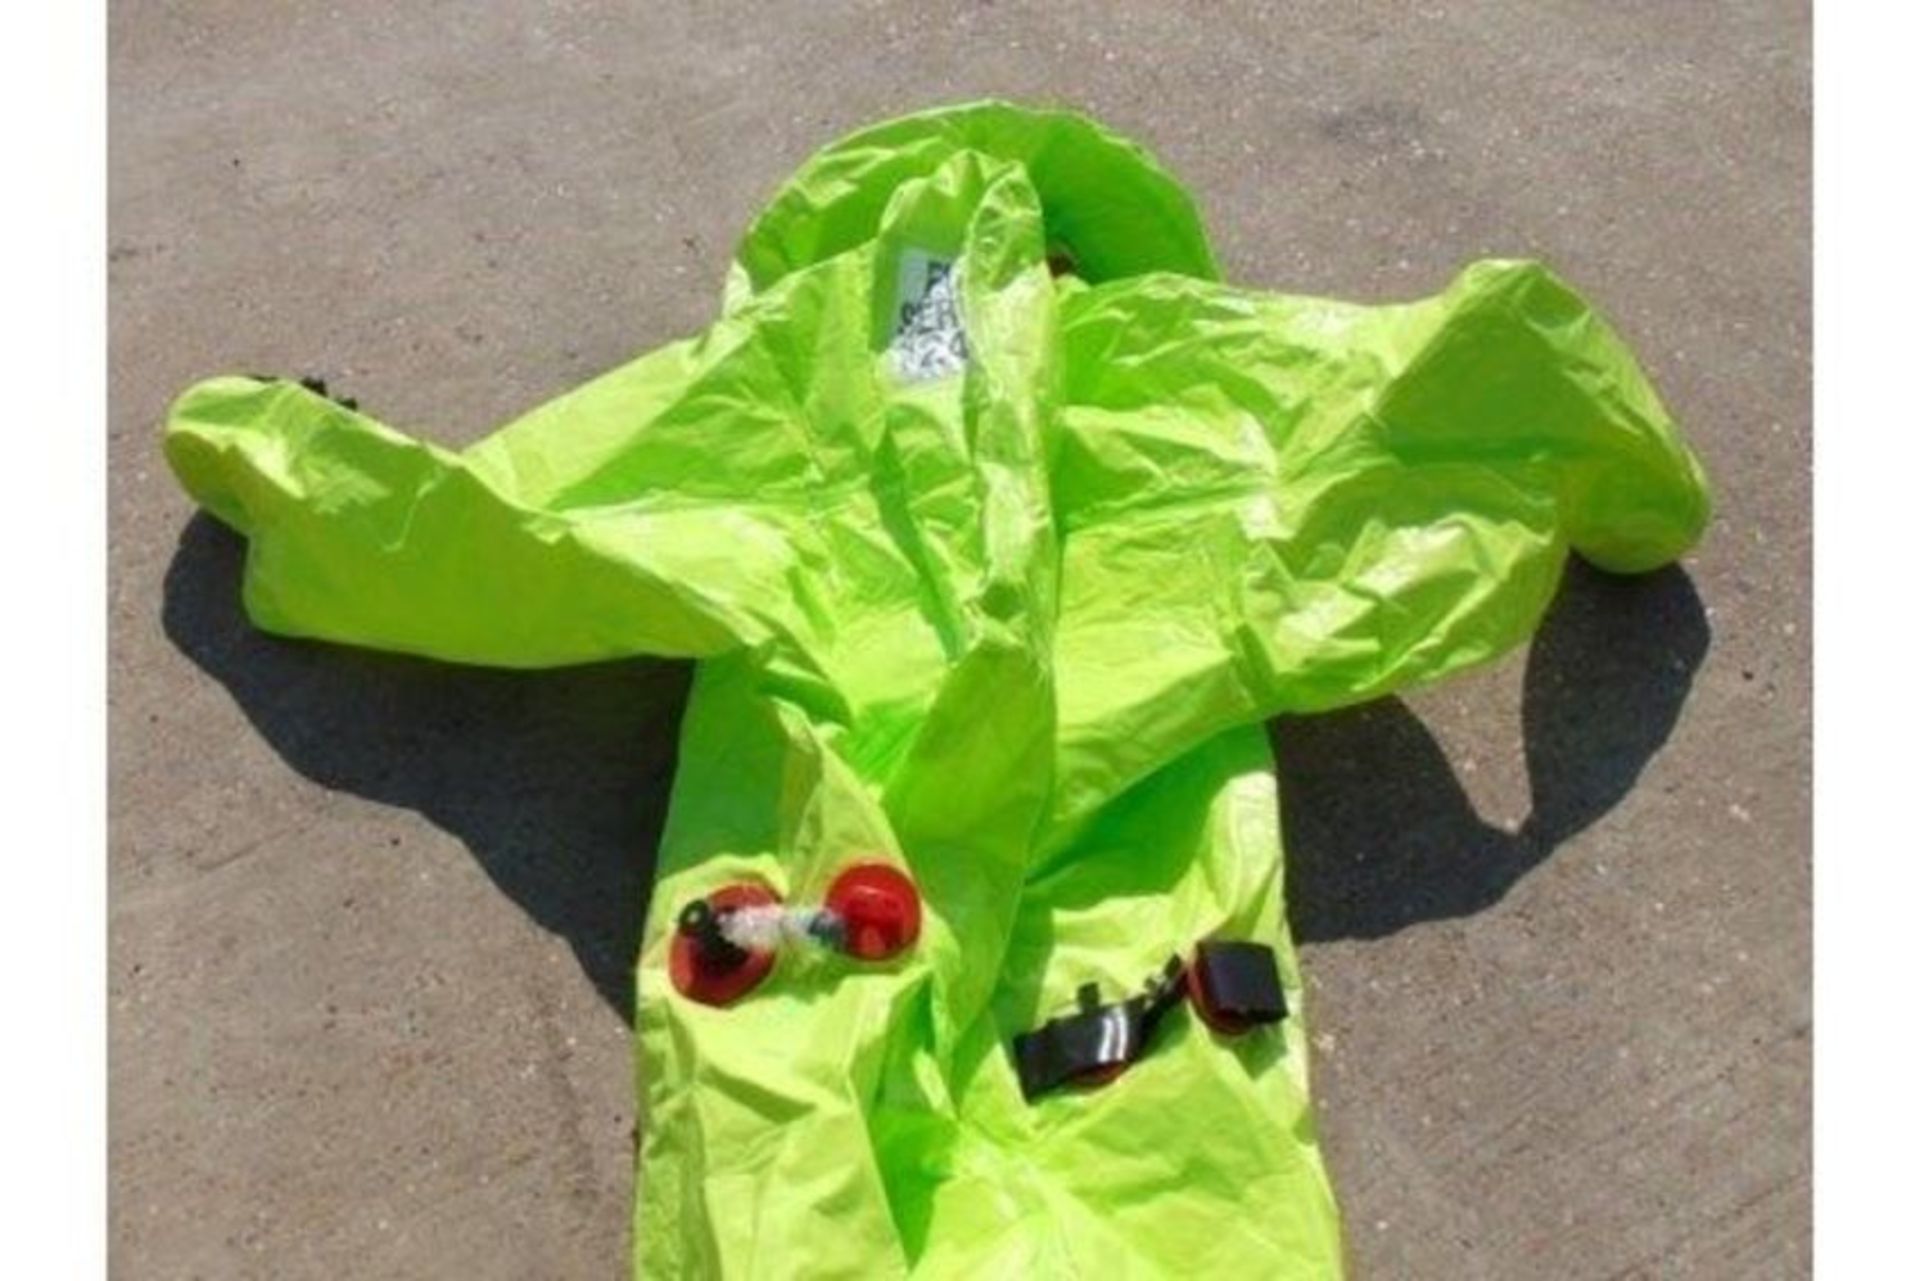 10 x Respirex Tychem TK Gas-Tight Hazmat Suit Type 1A with Attached Boots and Gloves - Image 6 of 10